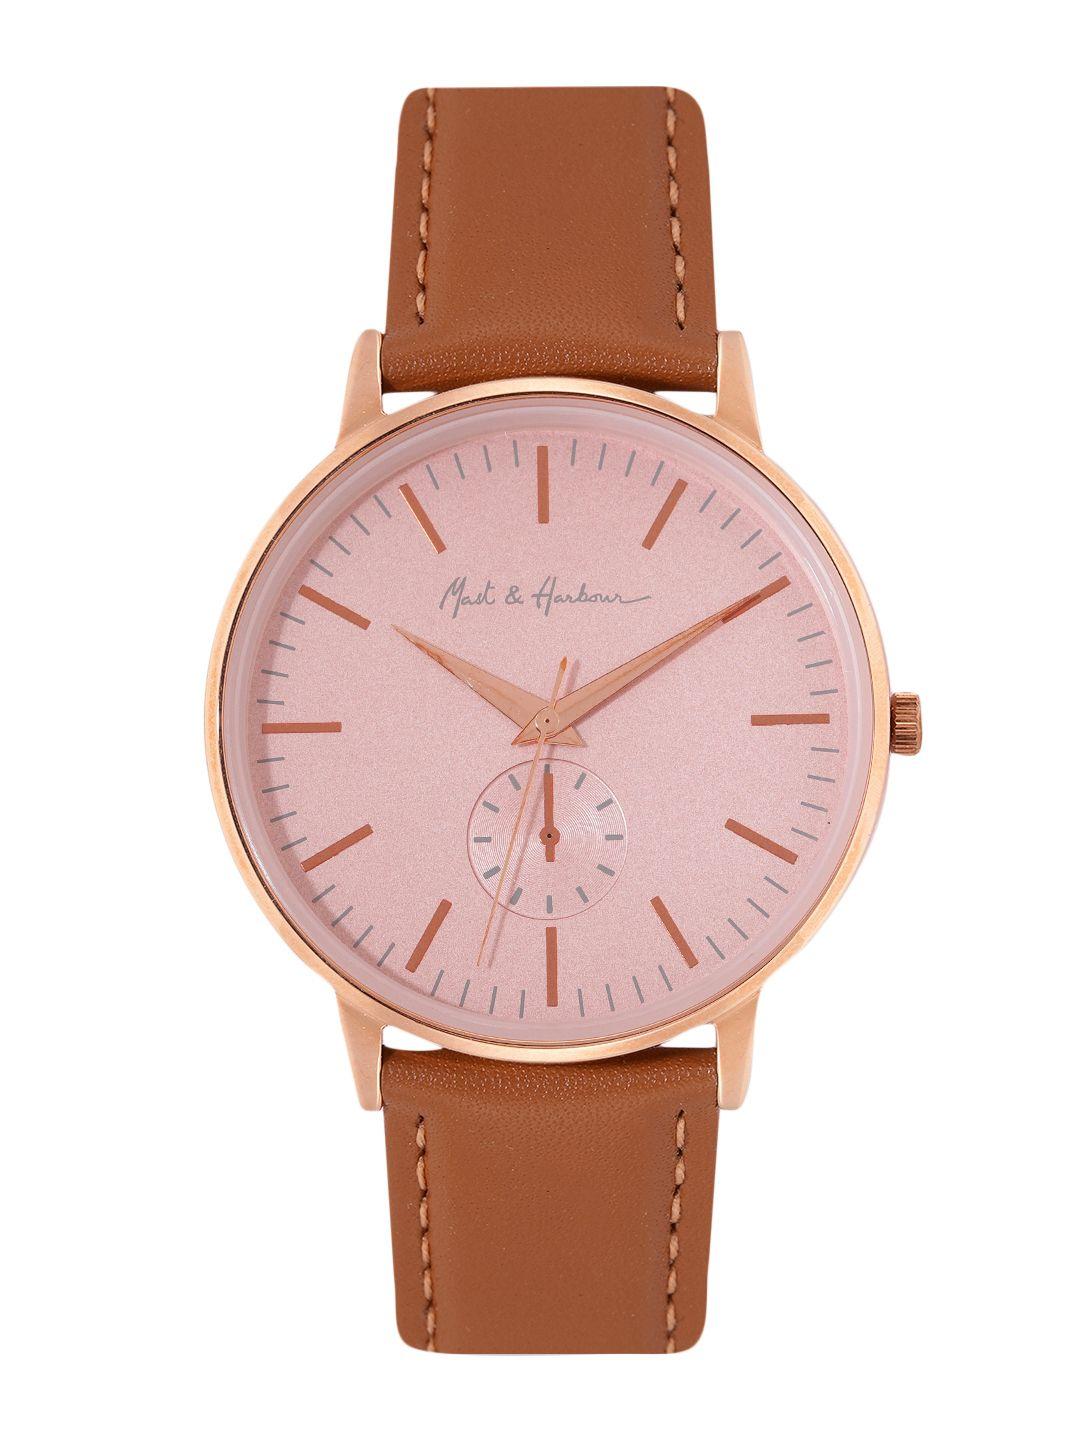 Mast & Harbour Women Analogue Watch MH-01-02A-Rose Gold